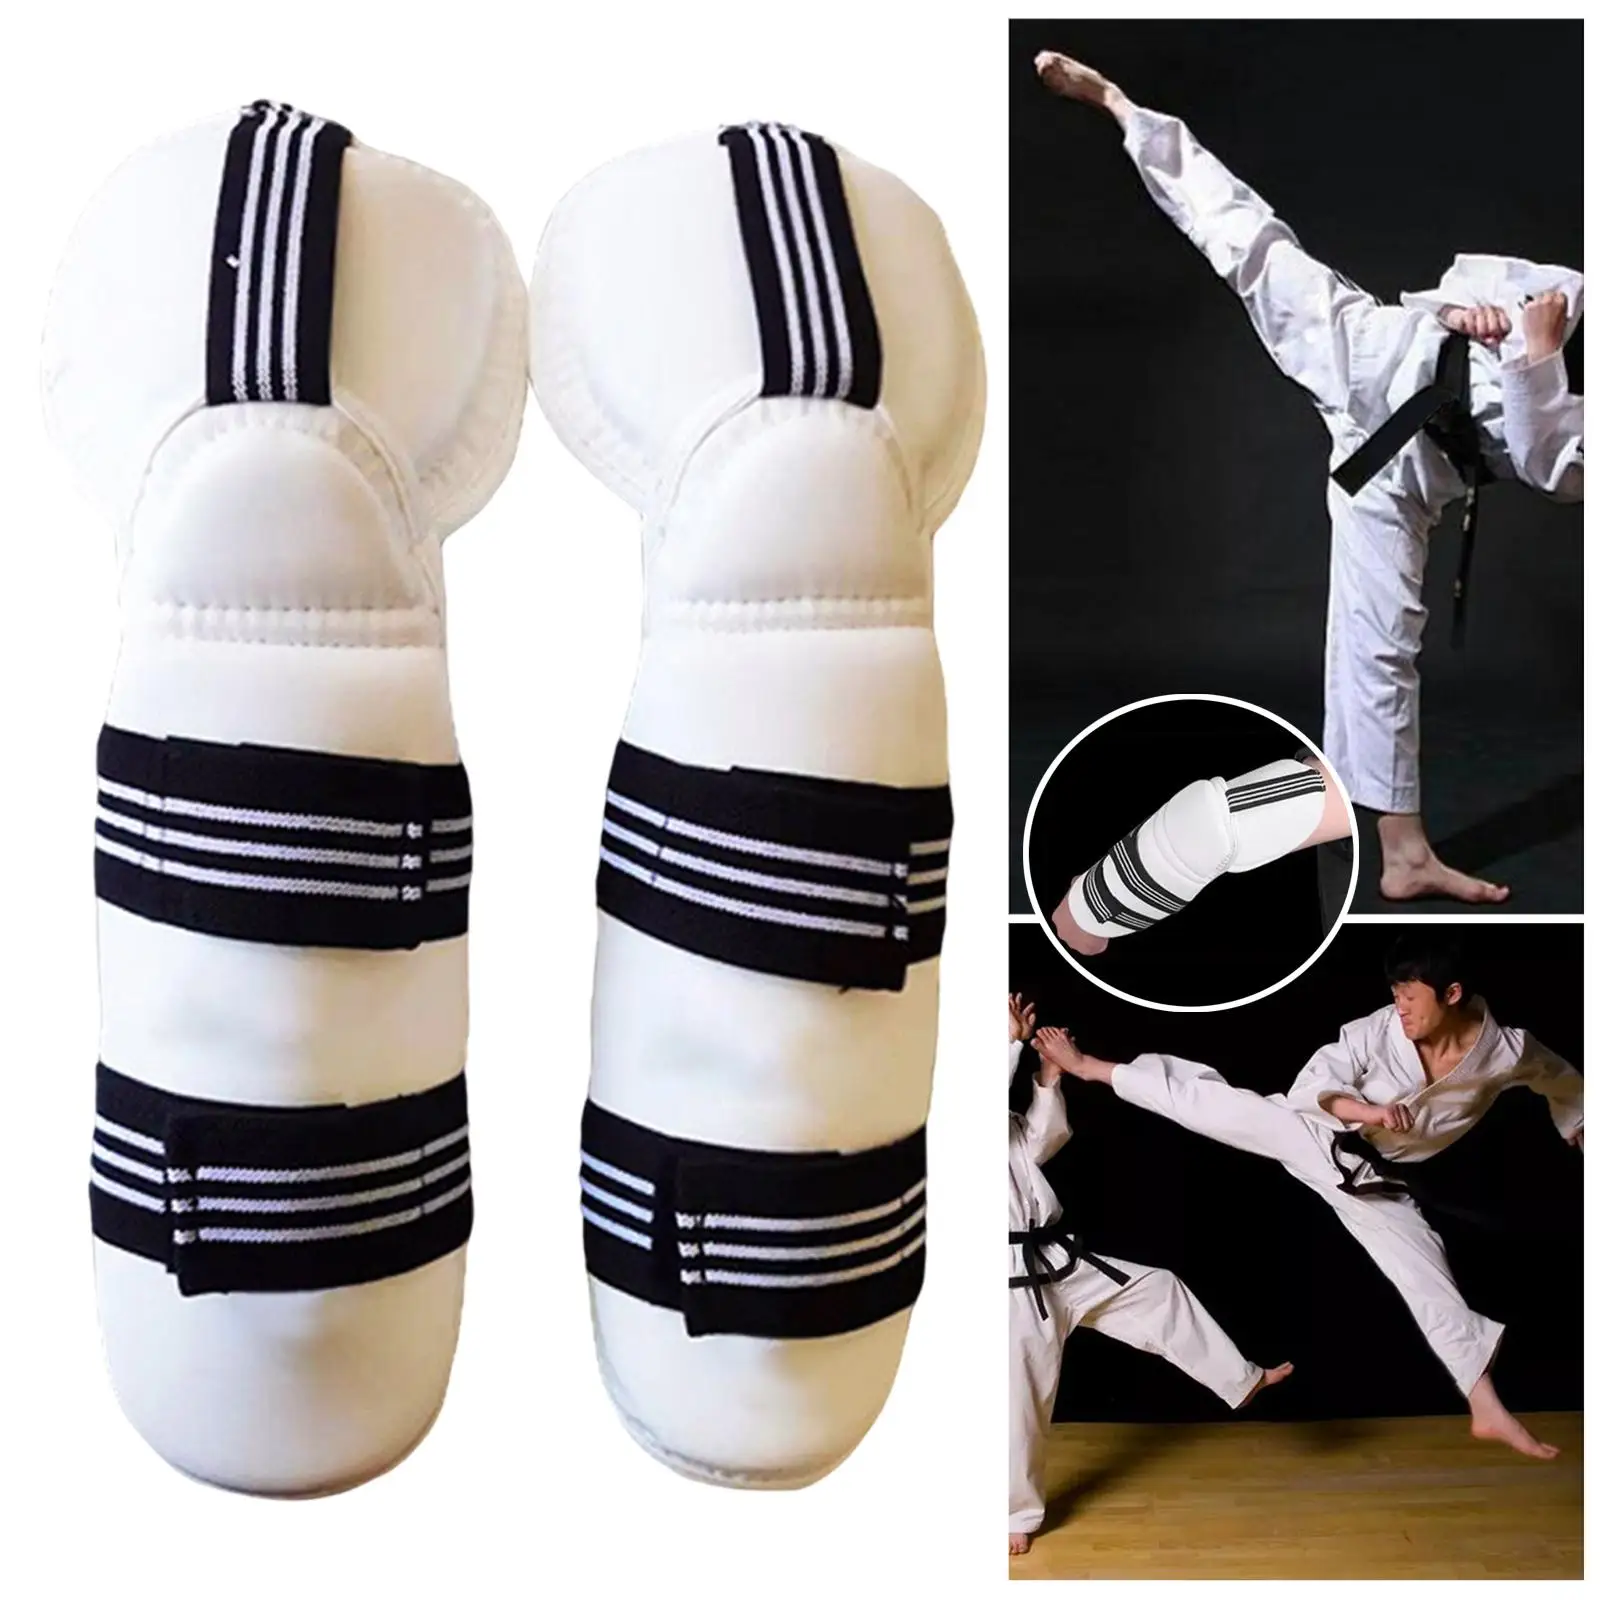 Taekwondo Guard Protective Gear for Muay Thai Sparring Unisex Adult Kids